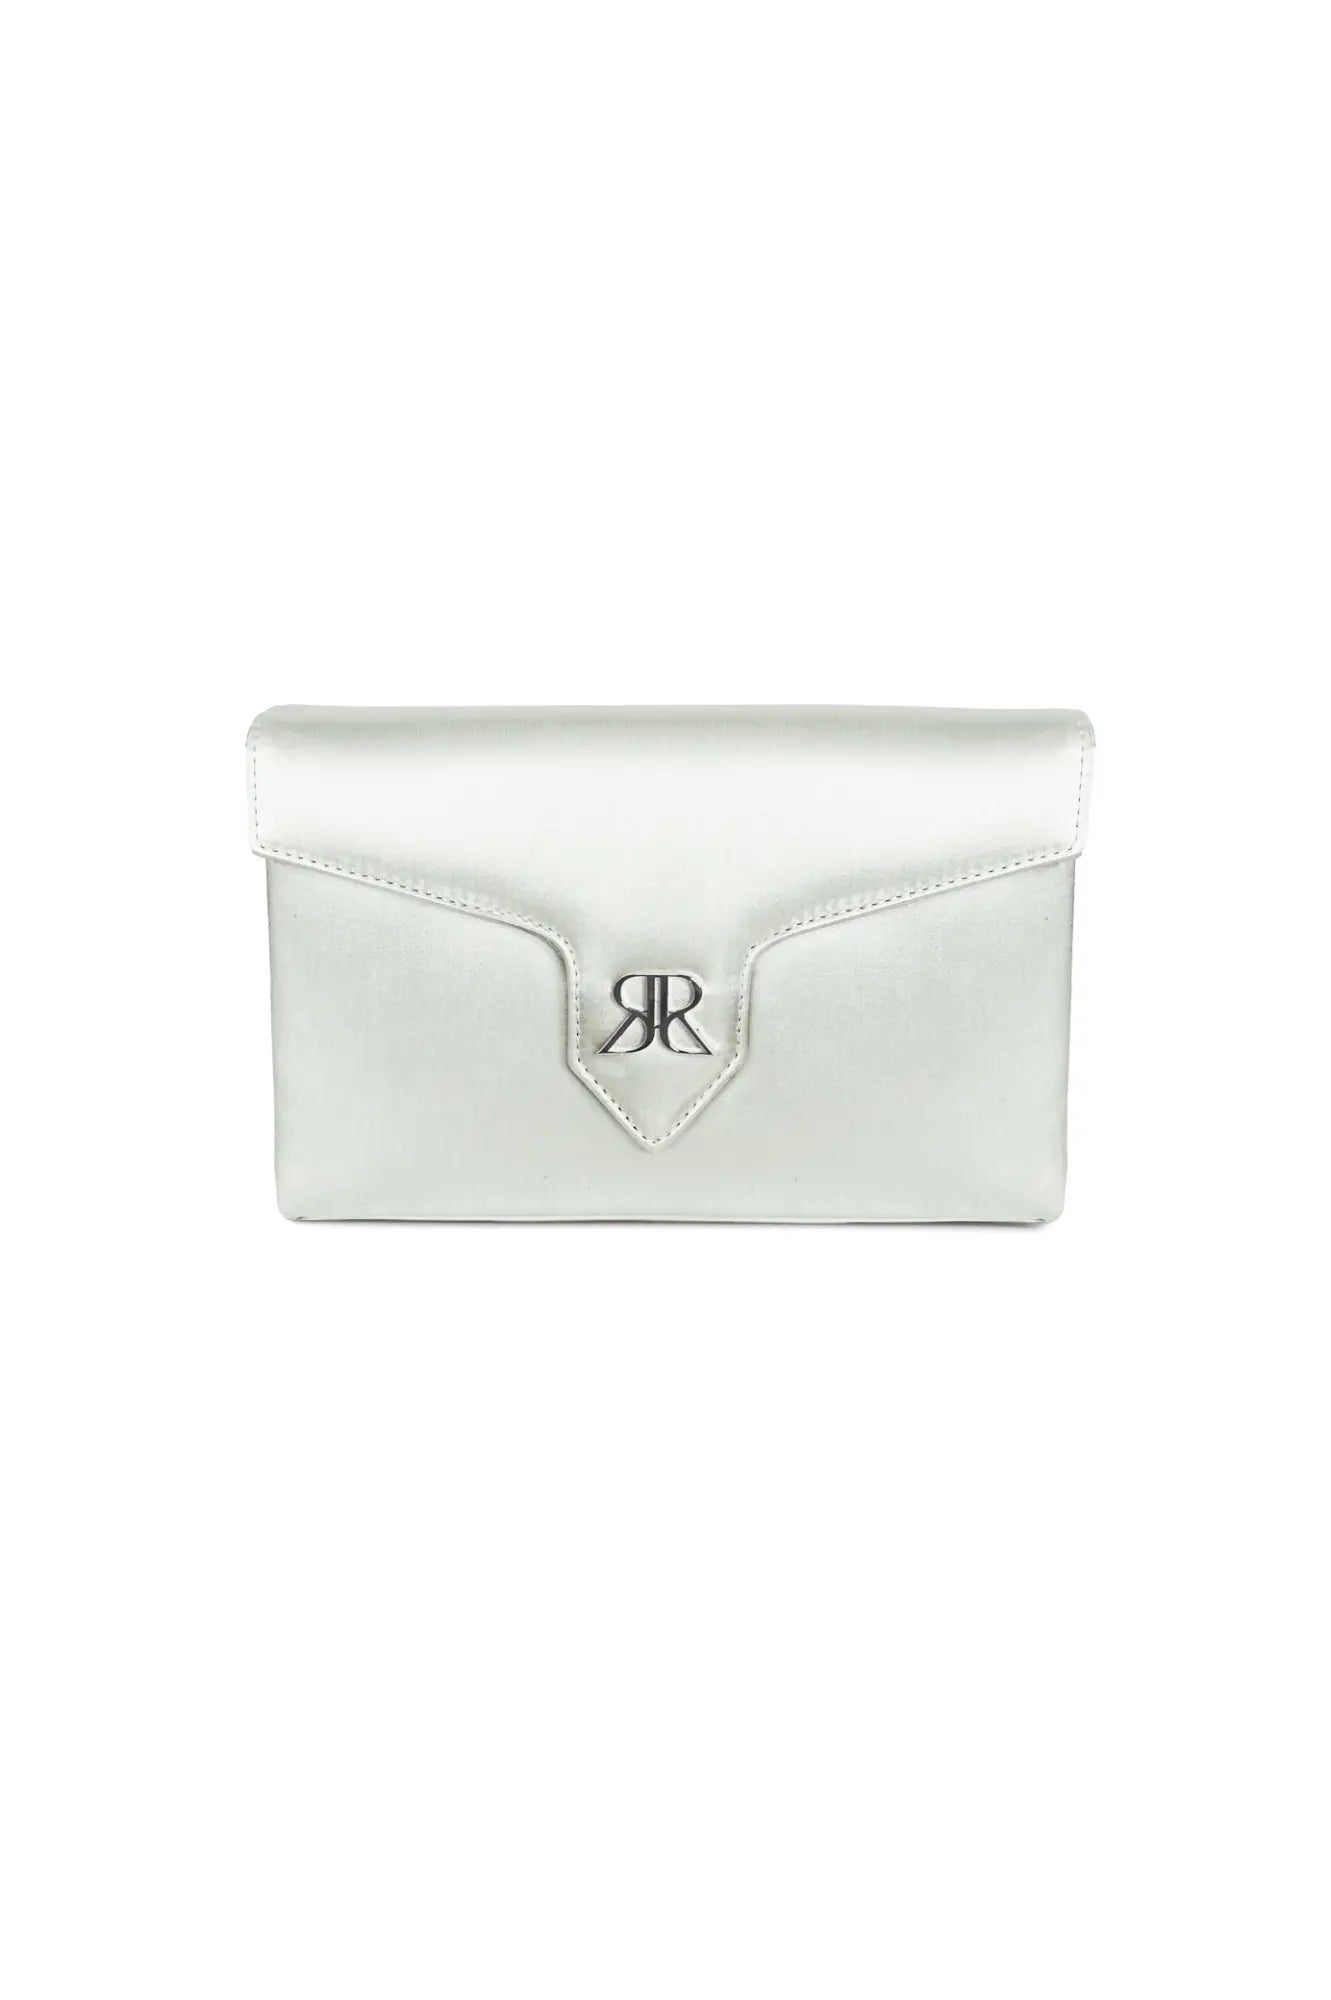 Steel Blue Duchess Satin Love Note Envelope Clutch Sage Green with a metallic logo clasp against a white background by The Bella Rosa Collection.